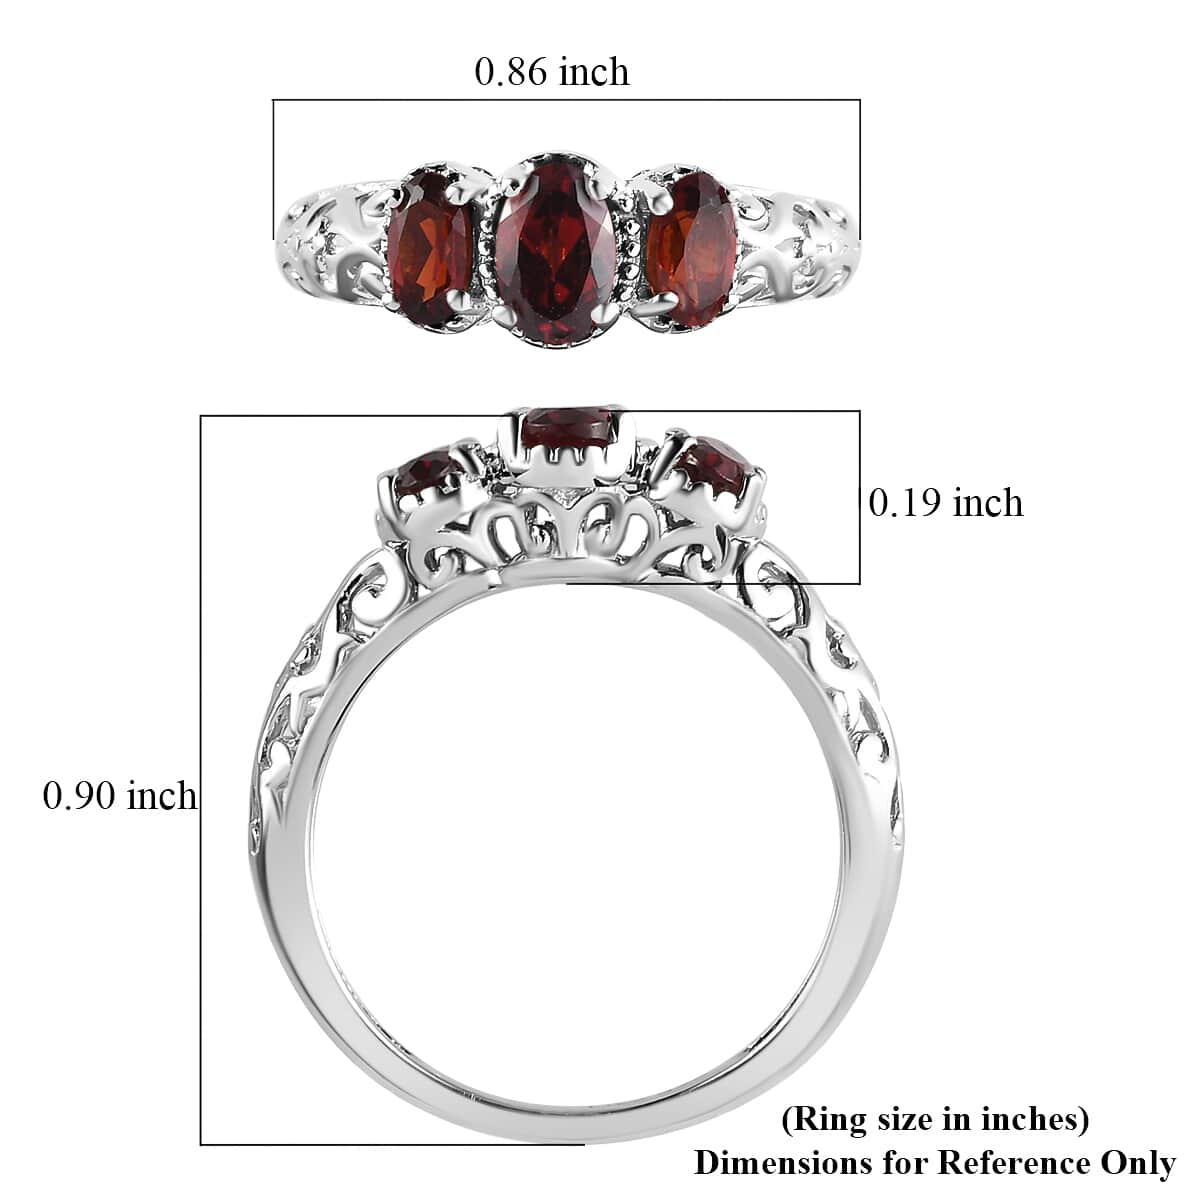 Garnet Ring, 3 Stone Garnet Ring, Trilogy Ring, Sterling Silver Ring, Birthstone Jewelry, Mozambique Garnet 3 Stone Ring 1.15 ctw (Size 7.0) image number 8